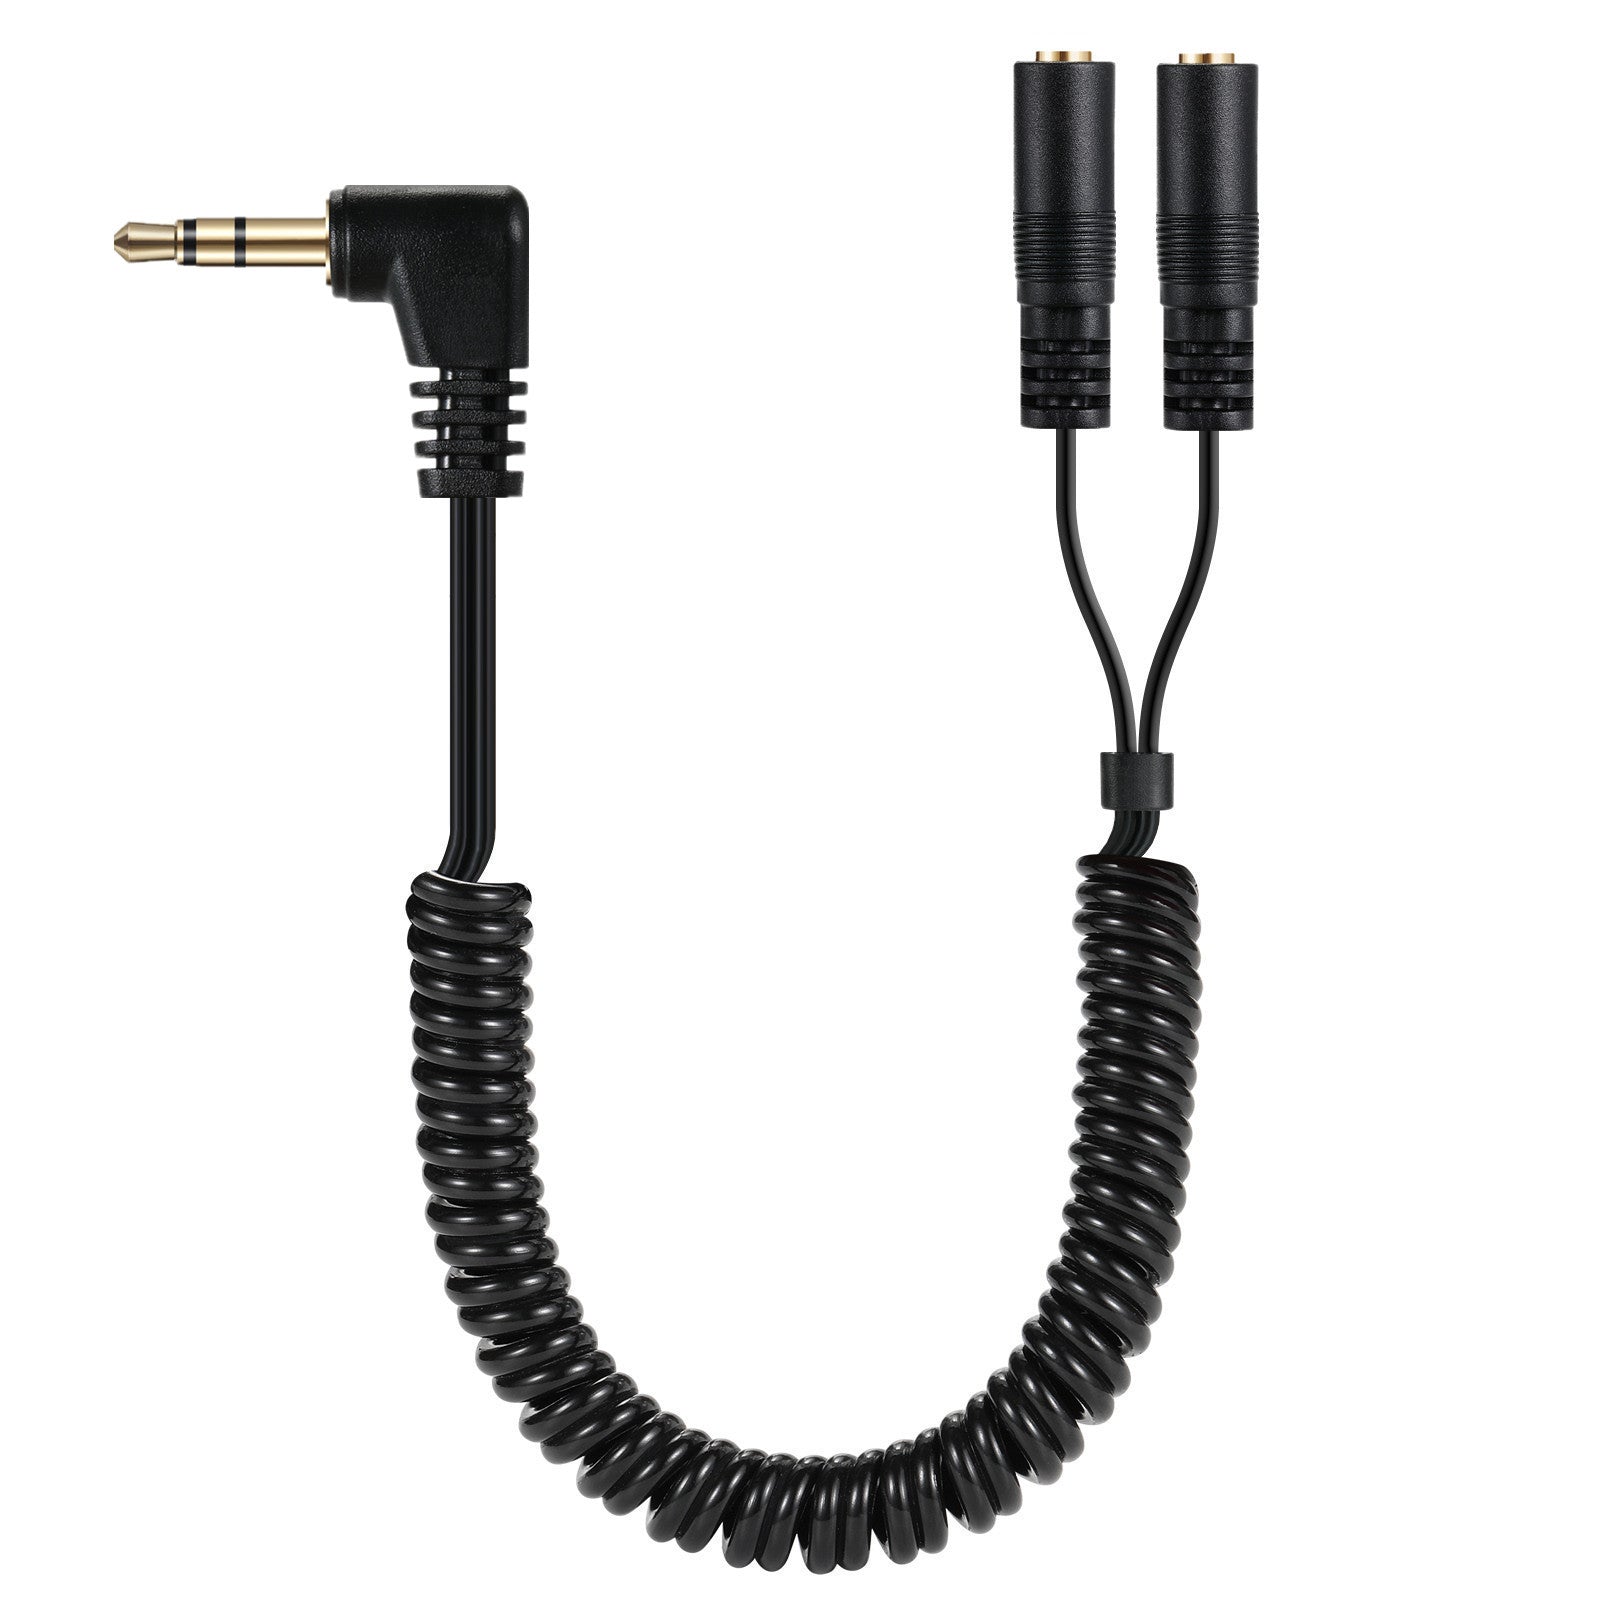 3.5mm Male to Dual Female Audio Stereo Headphone Y Splitter Cable